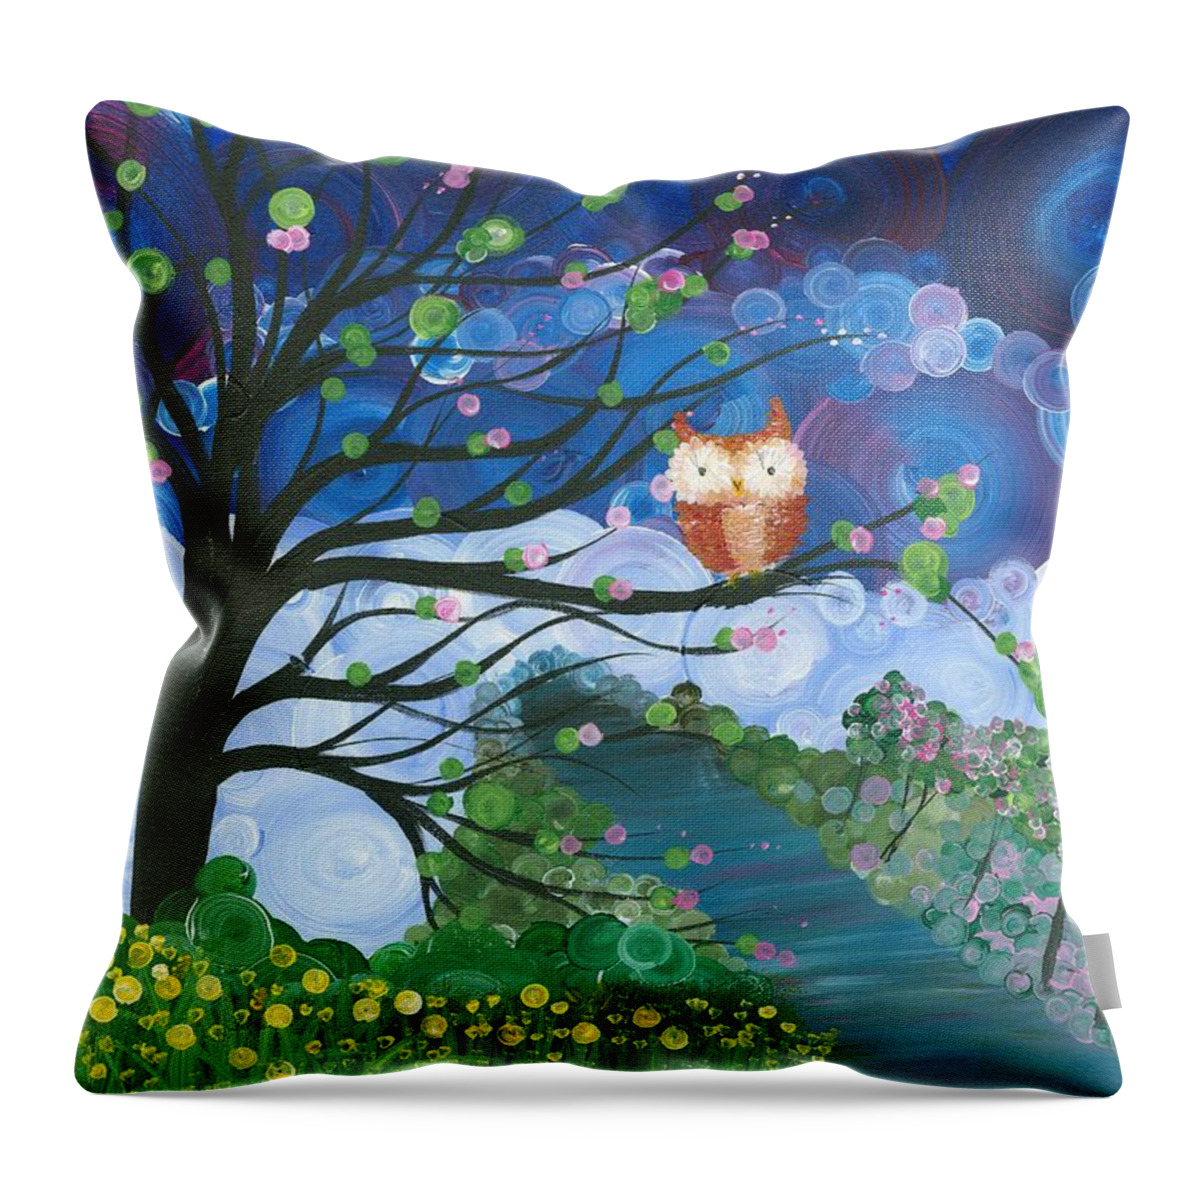 Owls Throw Pillow featuring the painting Hoolandia Seasons Spring by MiMi Stirn